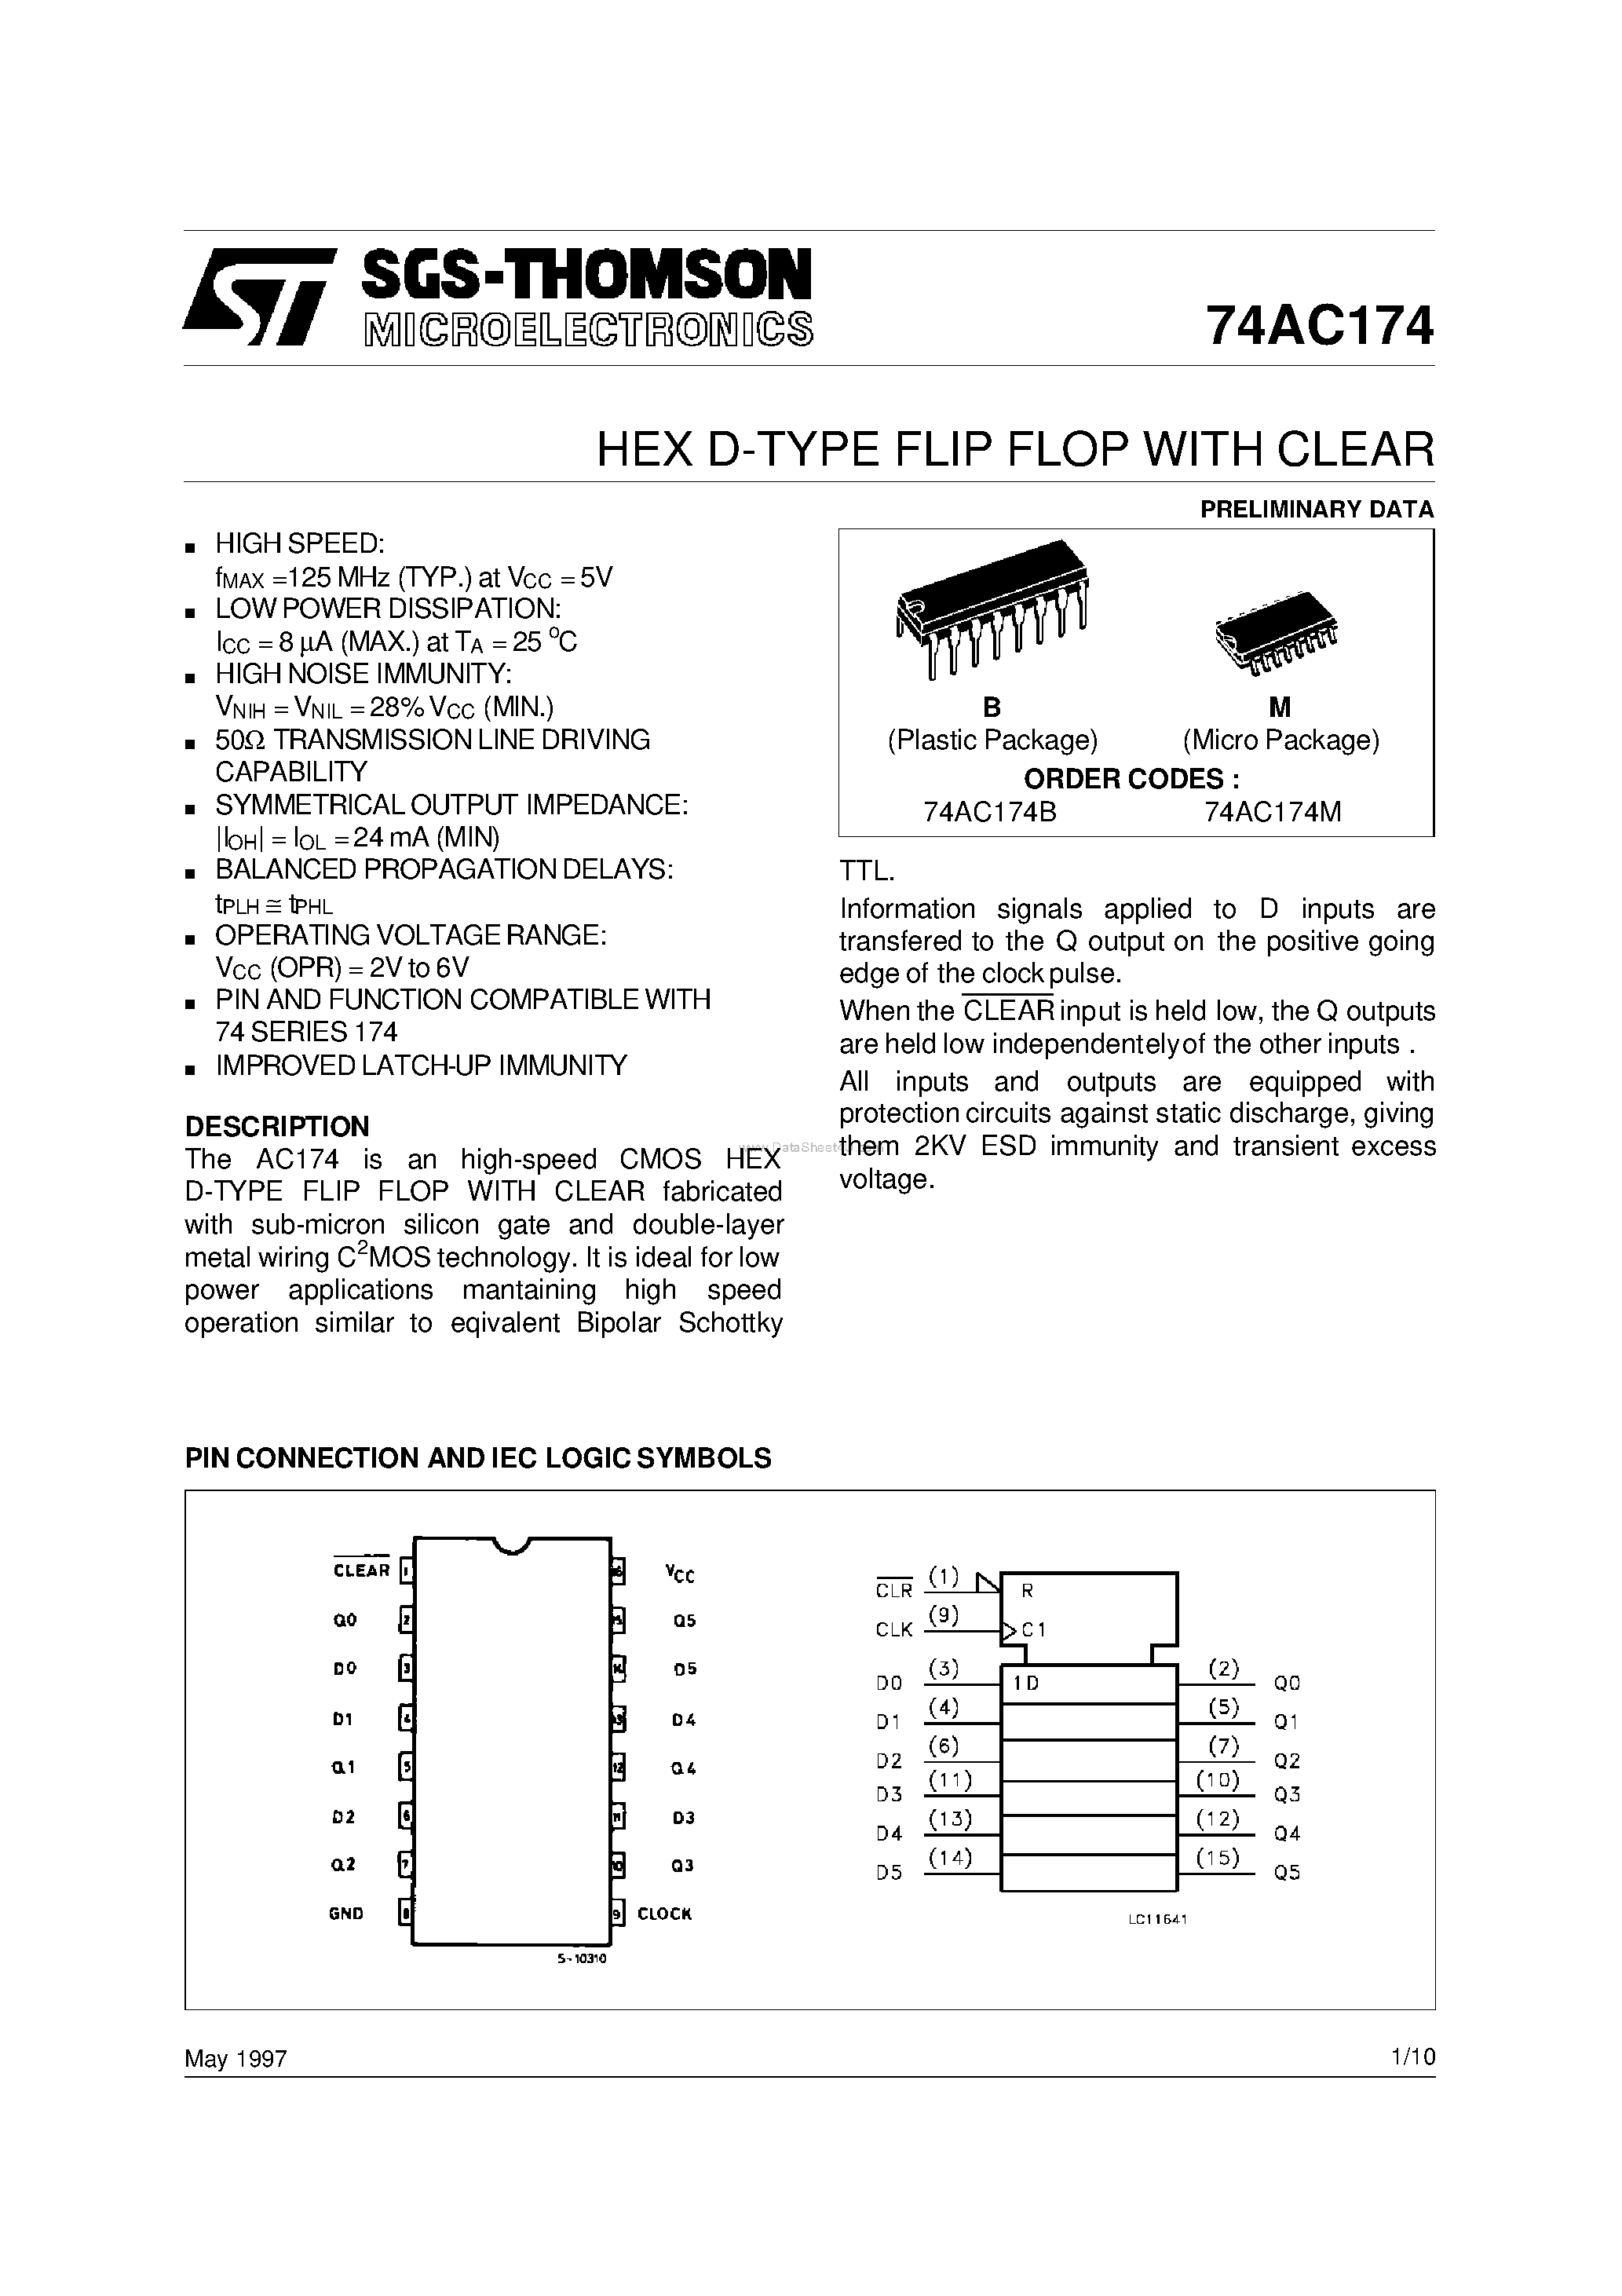 Datasheet 74AC174B - HEX D-TYPE FLIP FLOP WITH CLEAR page 1